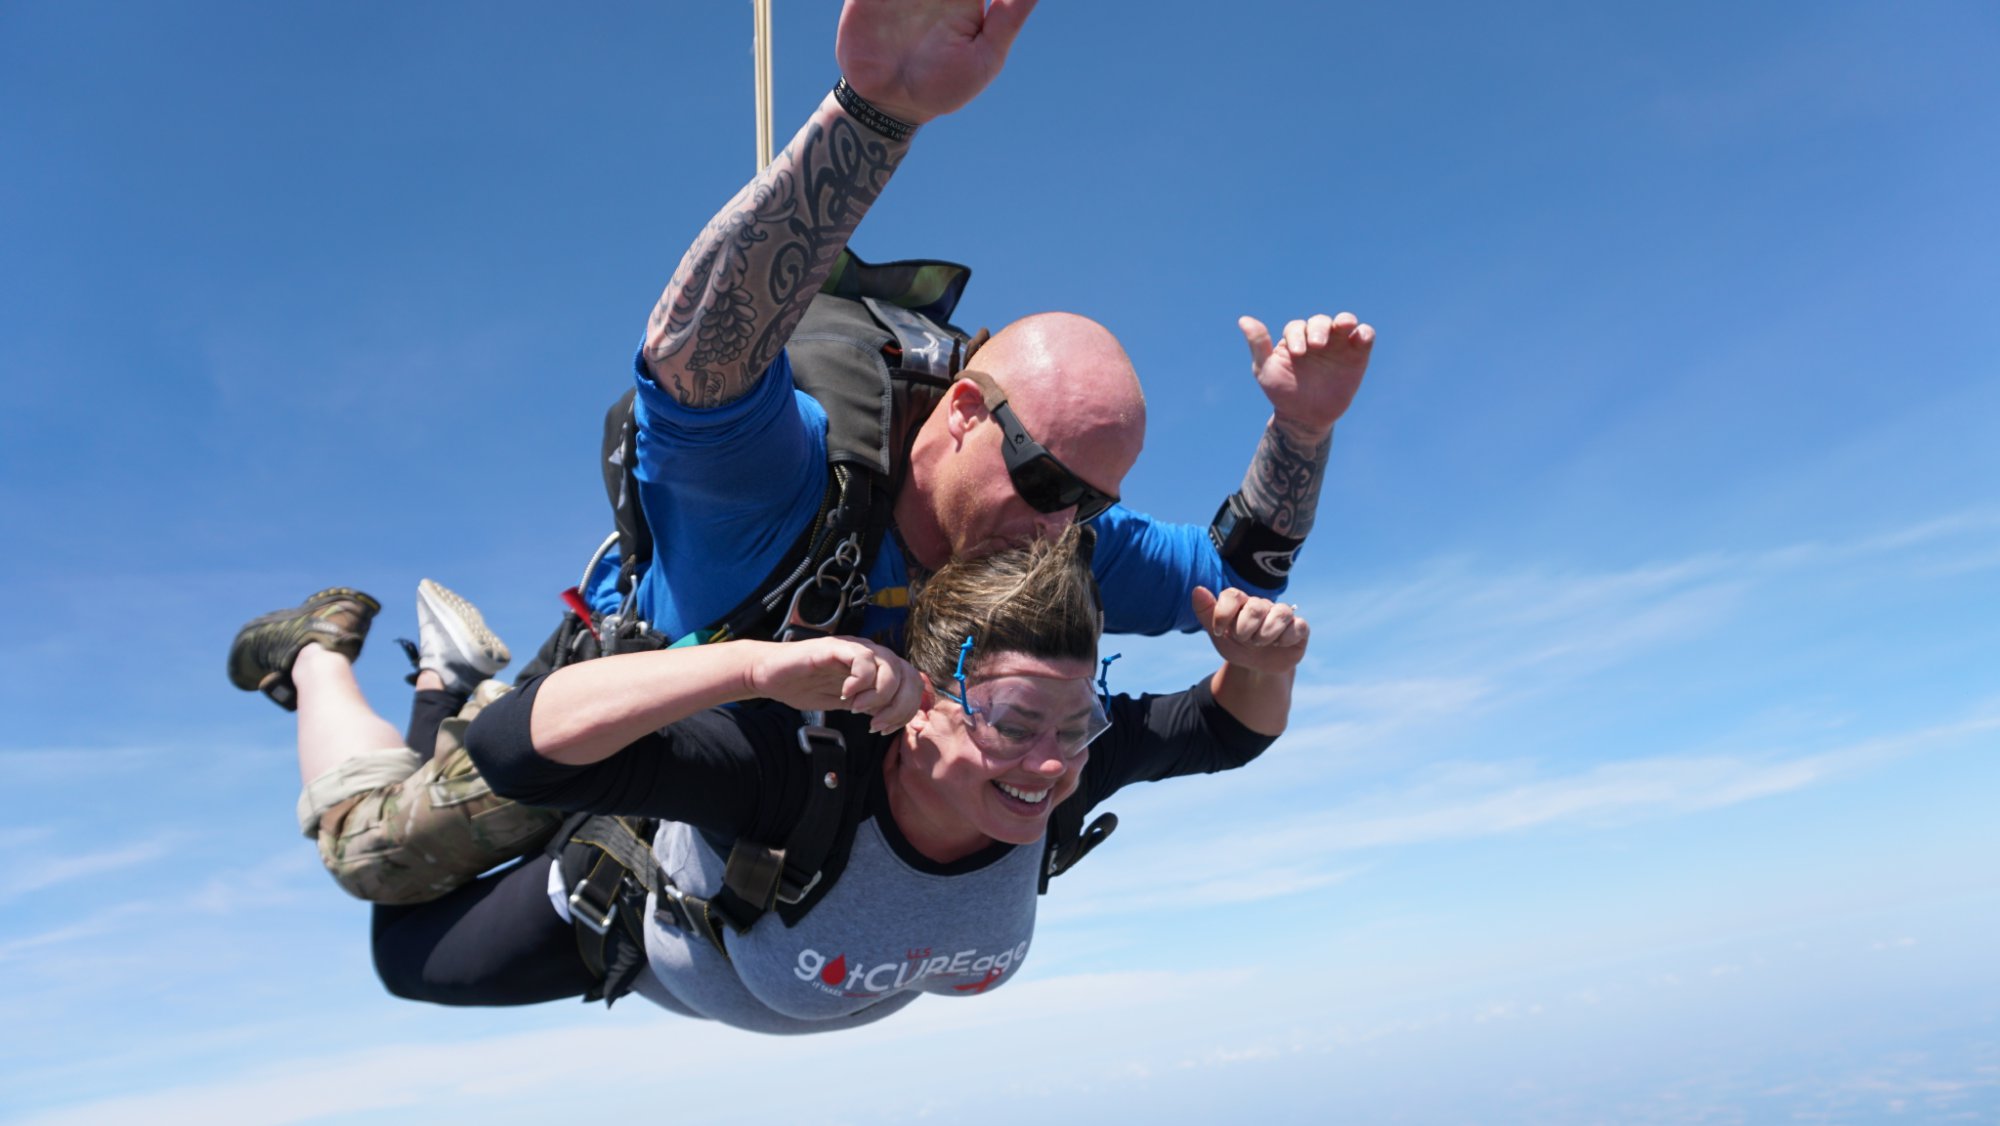 York Co. principal follows through with promise to skydive after ...